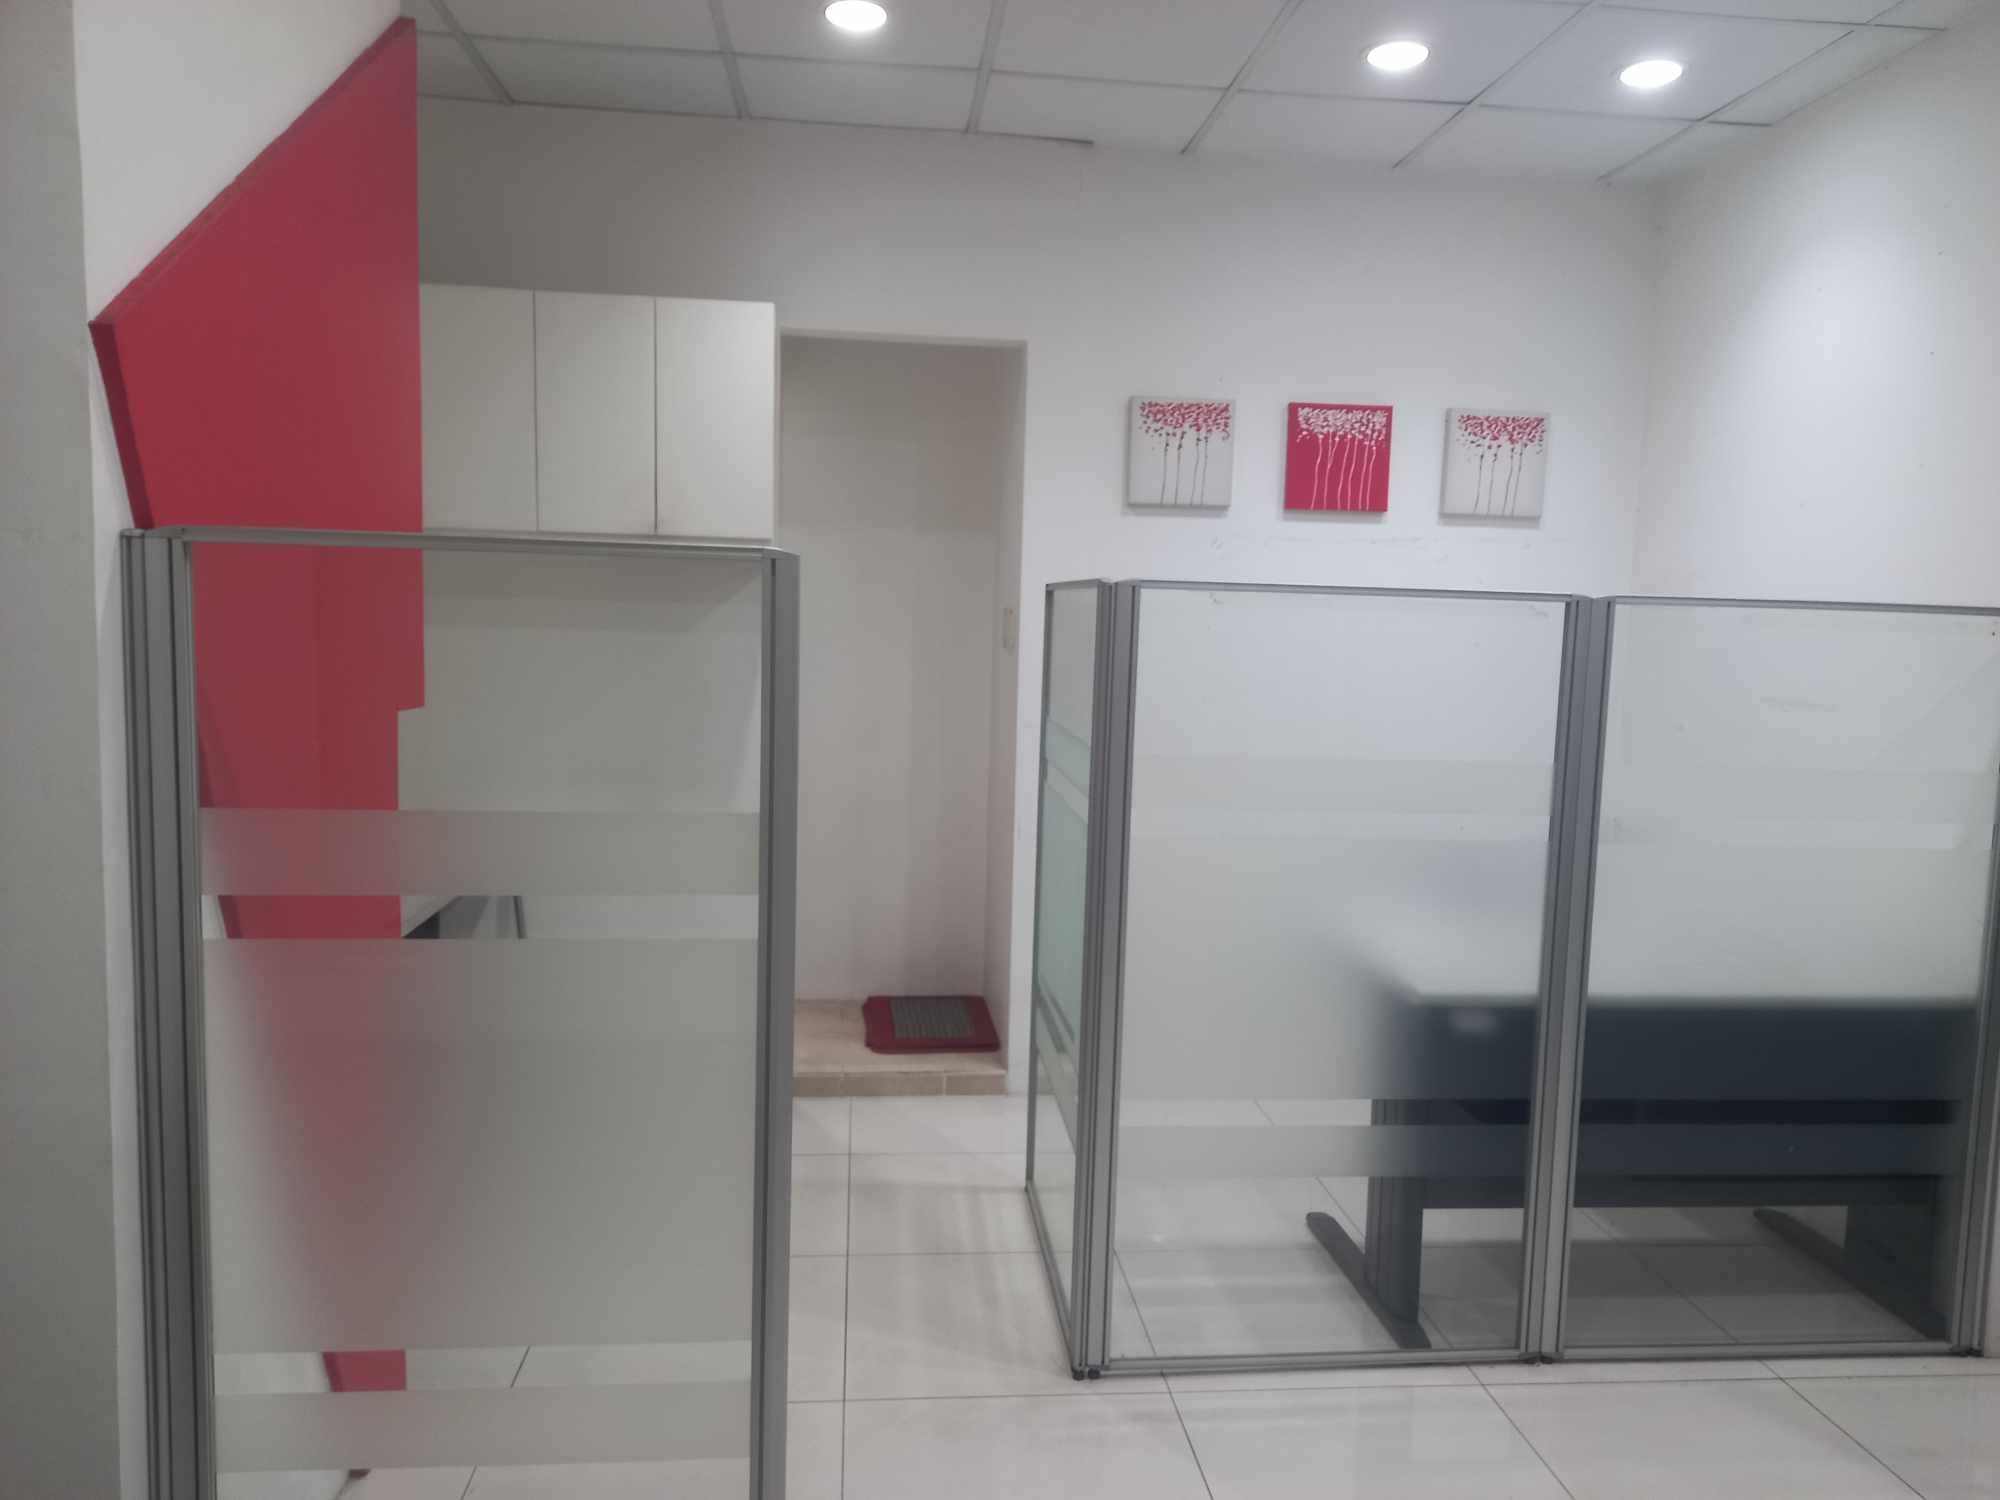 For Rent Lease Office Space Fitted Mandaluyong City Manila